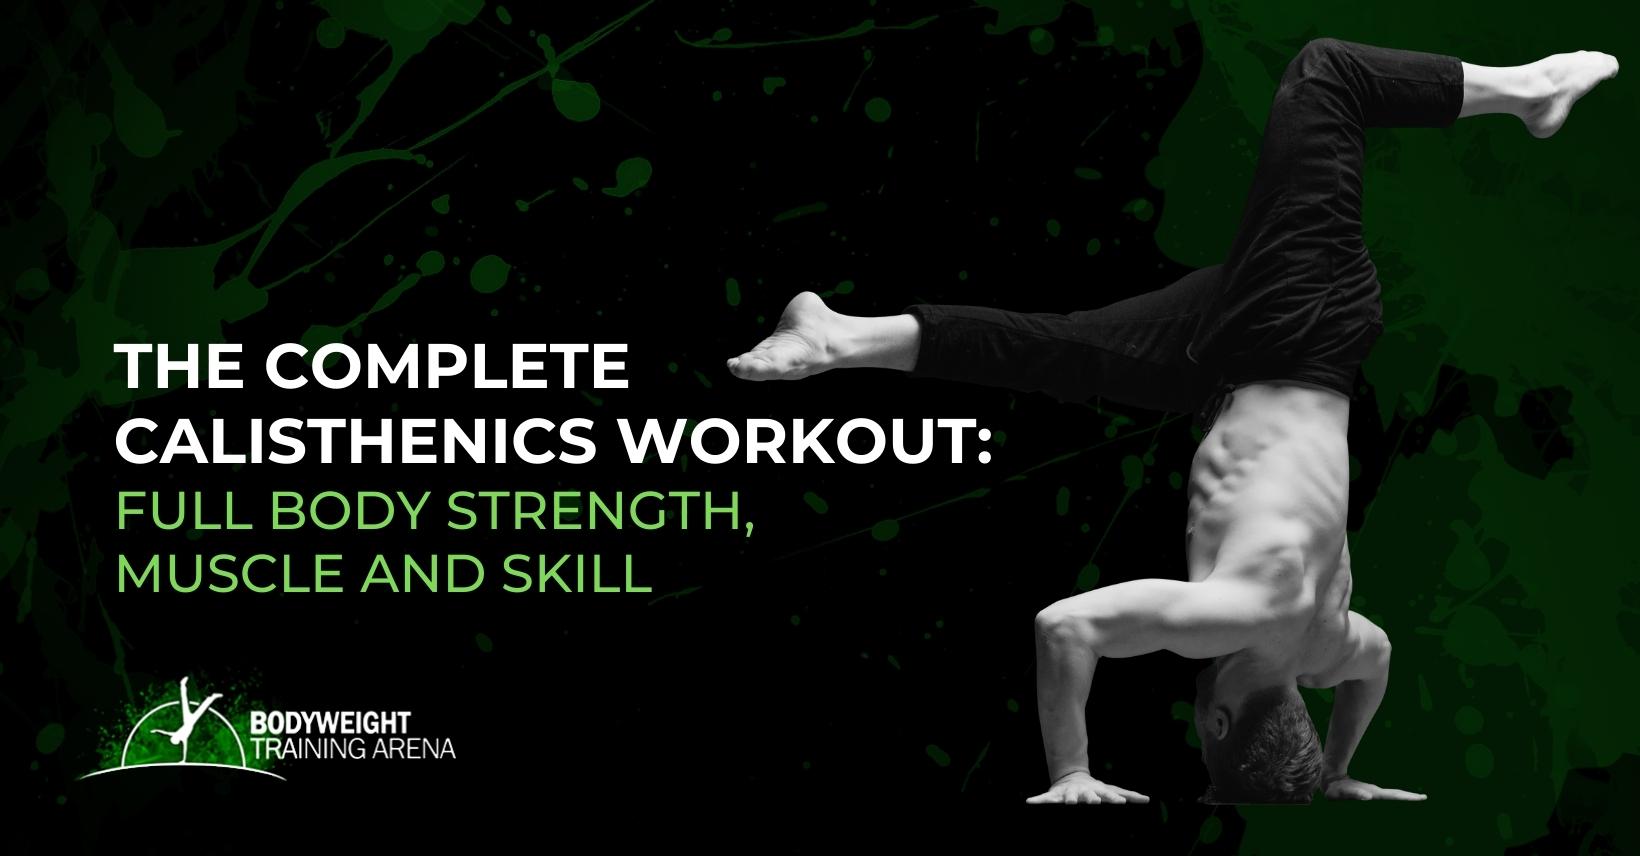 The complete calisthenics workout – Full body strength, muscle and skill